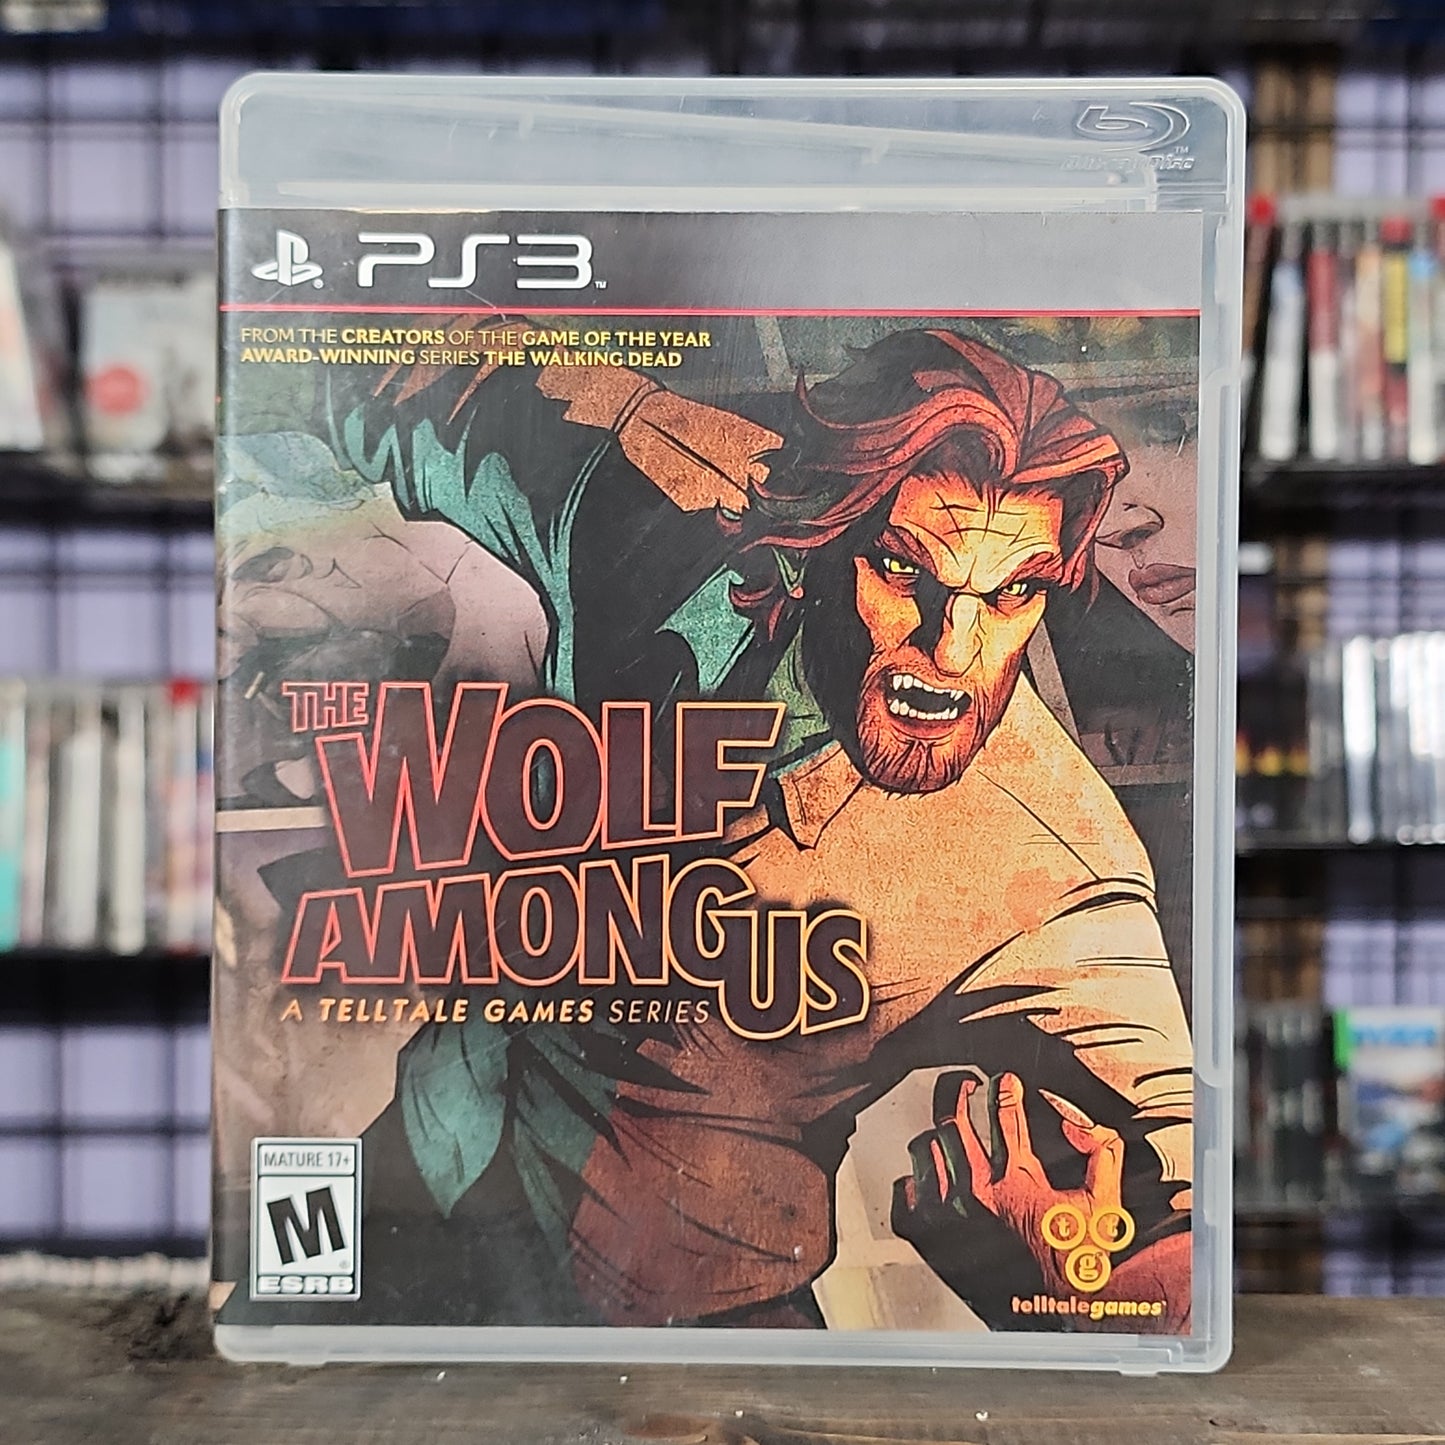 Playstation 3 - The Wolf Among Us